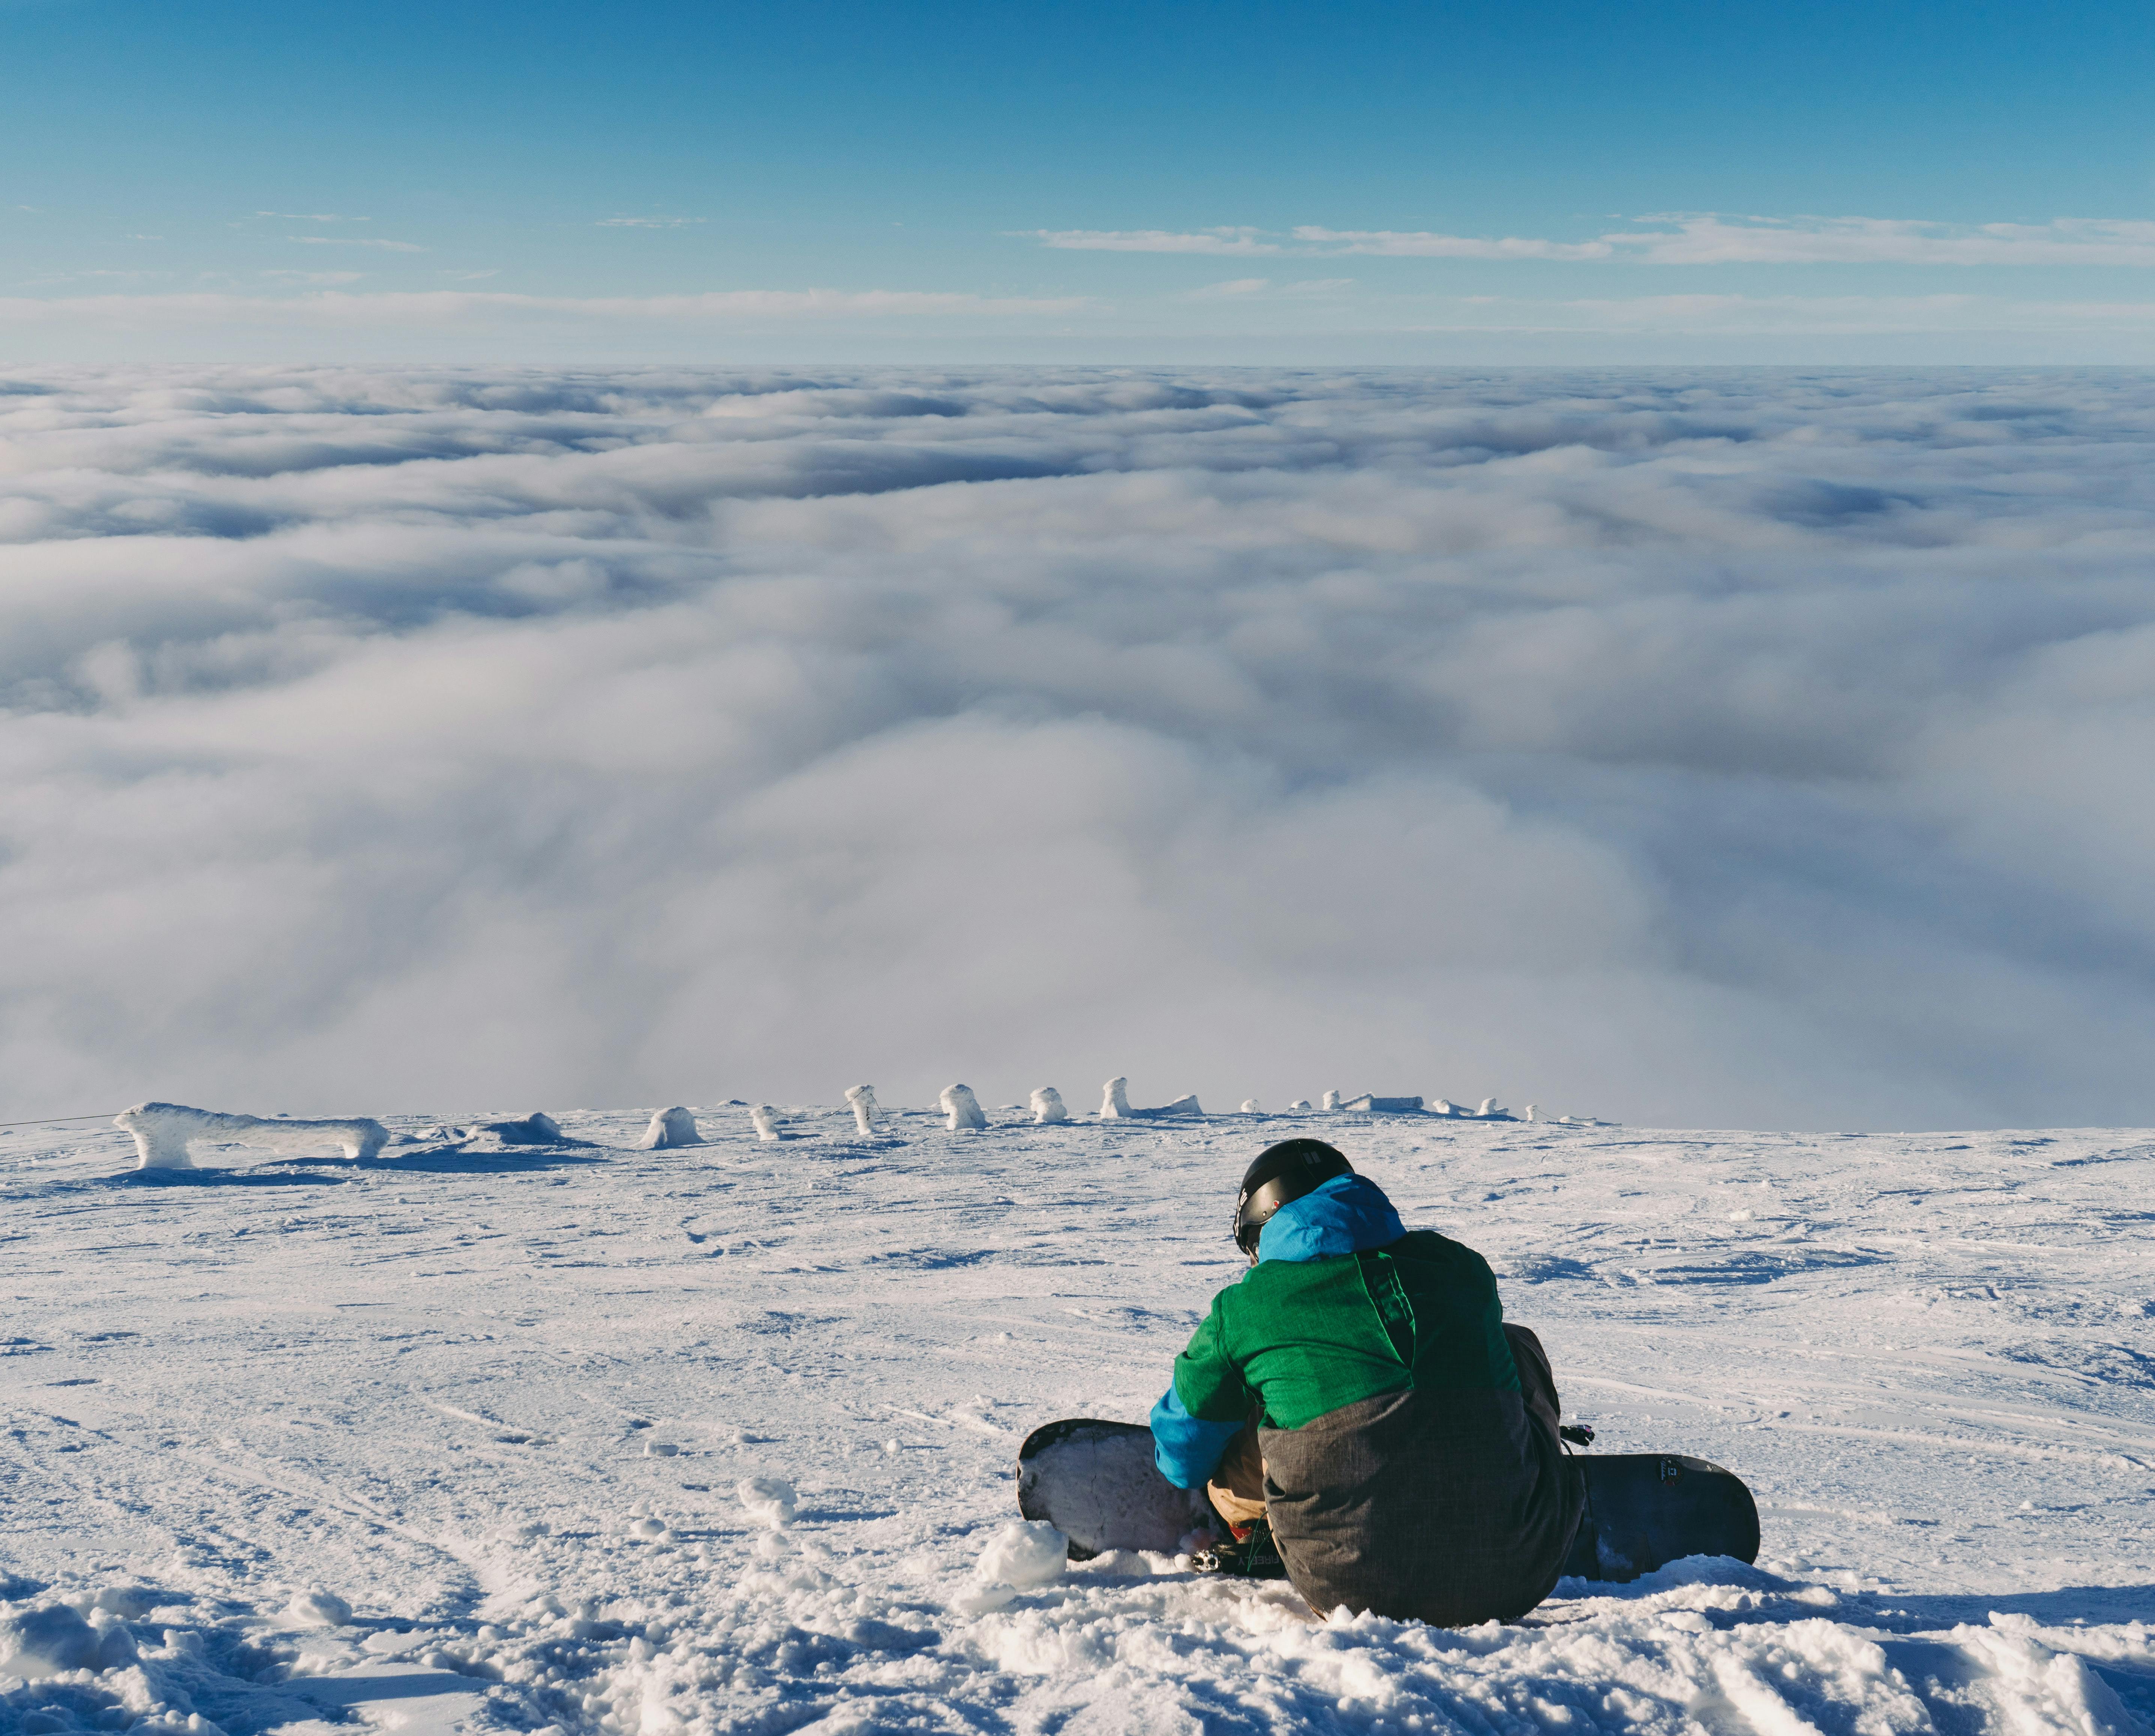 A snowboarder sits by themselves on a flat area with a view of the clouds stretching before them.